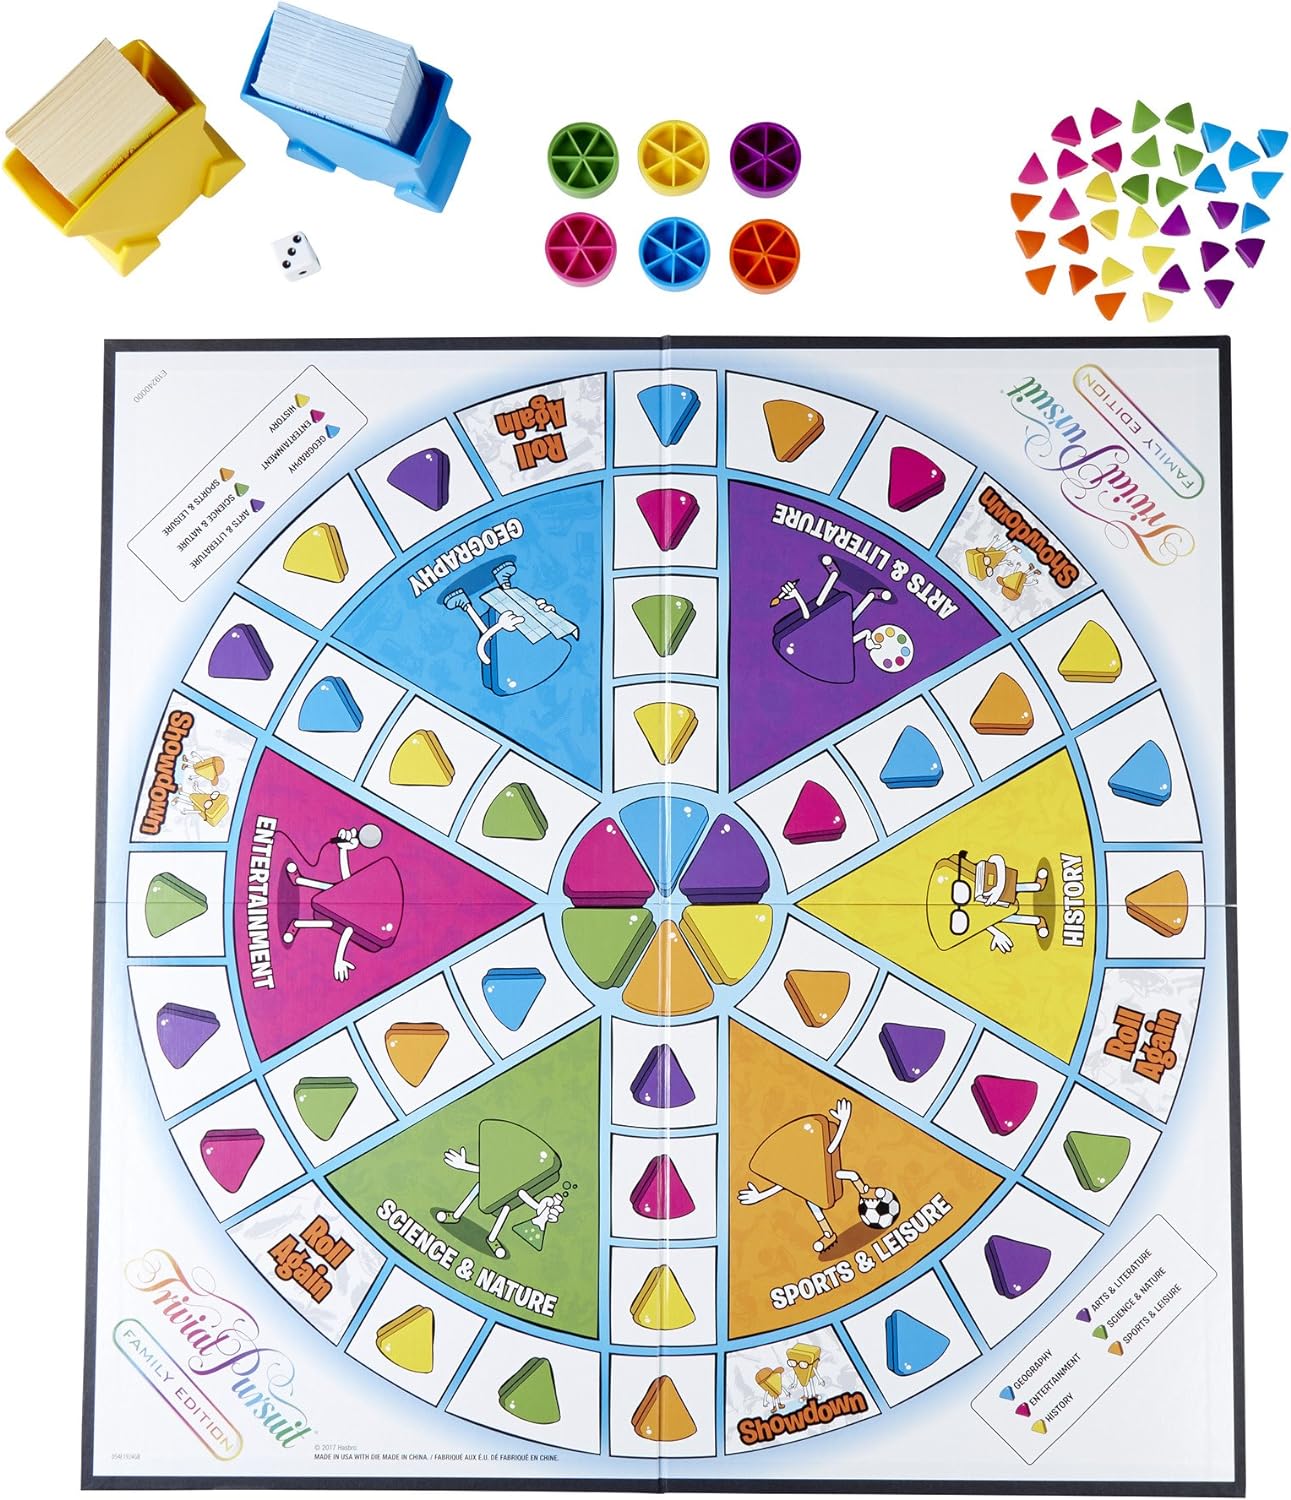 Hasbro Gaming - Trivial Pursuit Family Edition